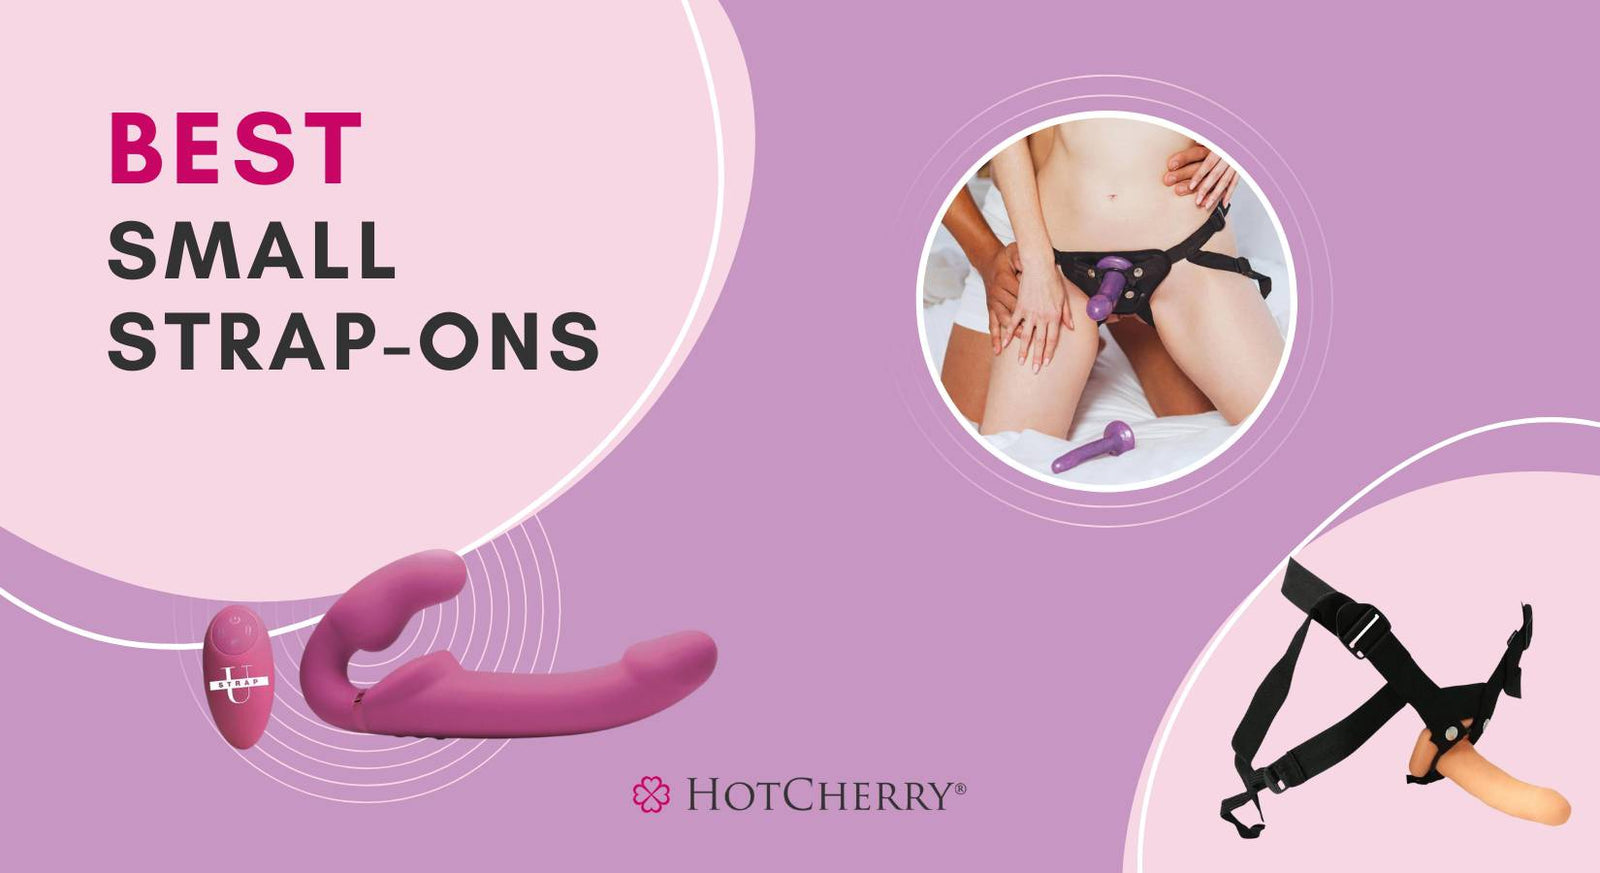 10 Best Small Strap-On Sets for Couples